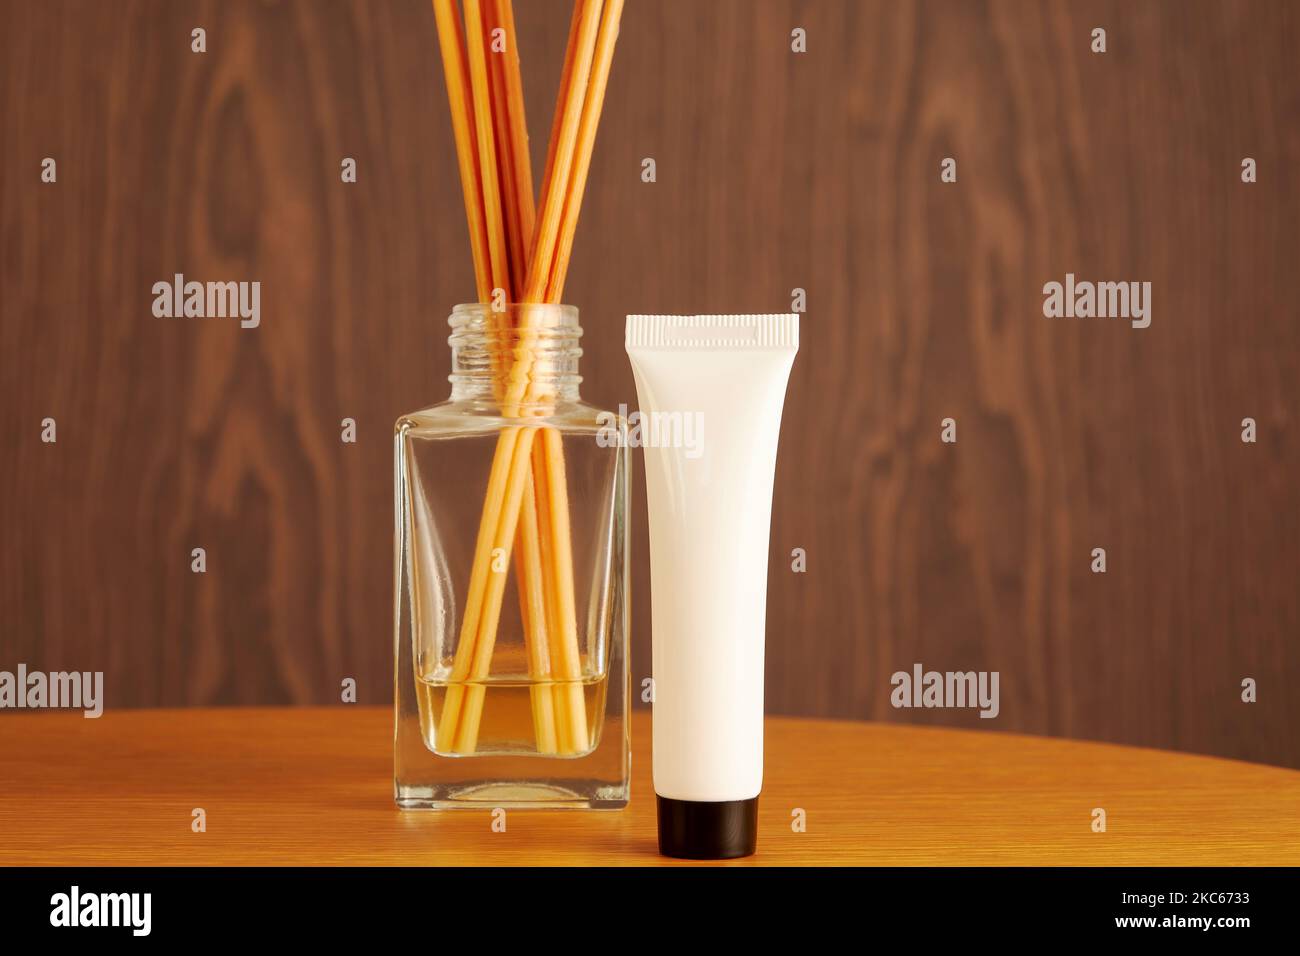 Plastic white beauty cosmetic bottle with aroma cream on the wooden table. White template with place for label. Copy space for advertisement Stock Photo